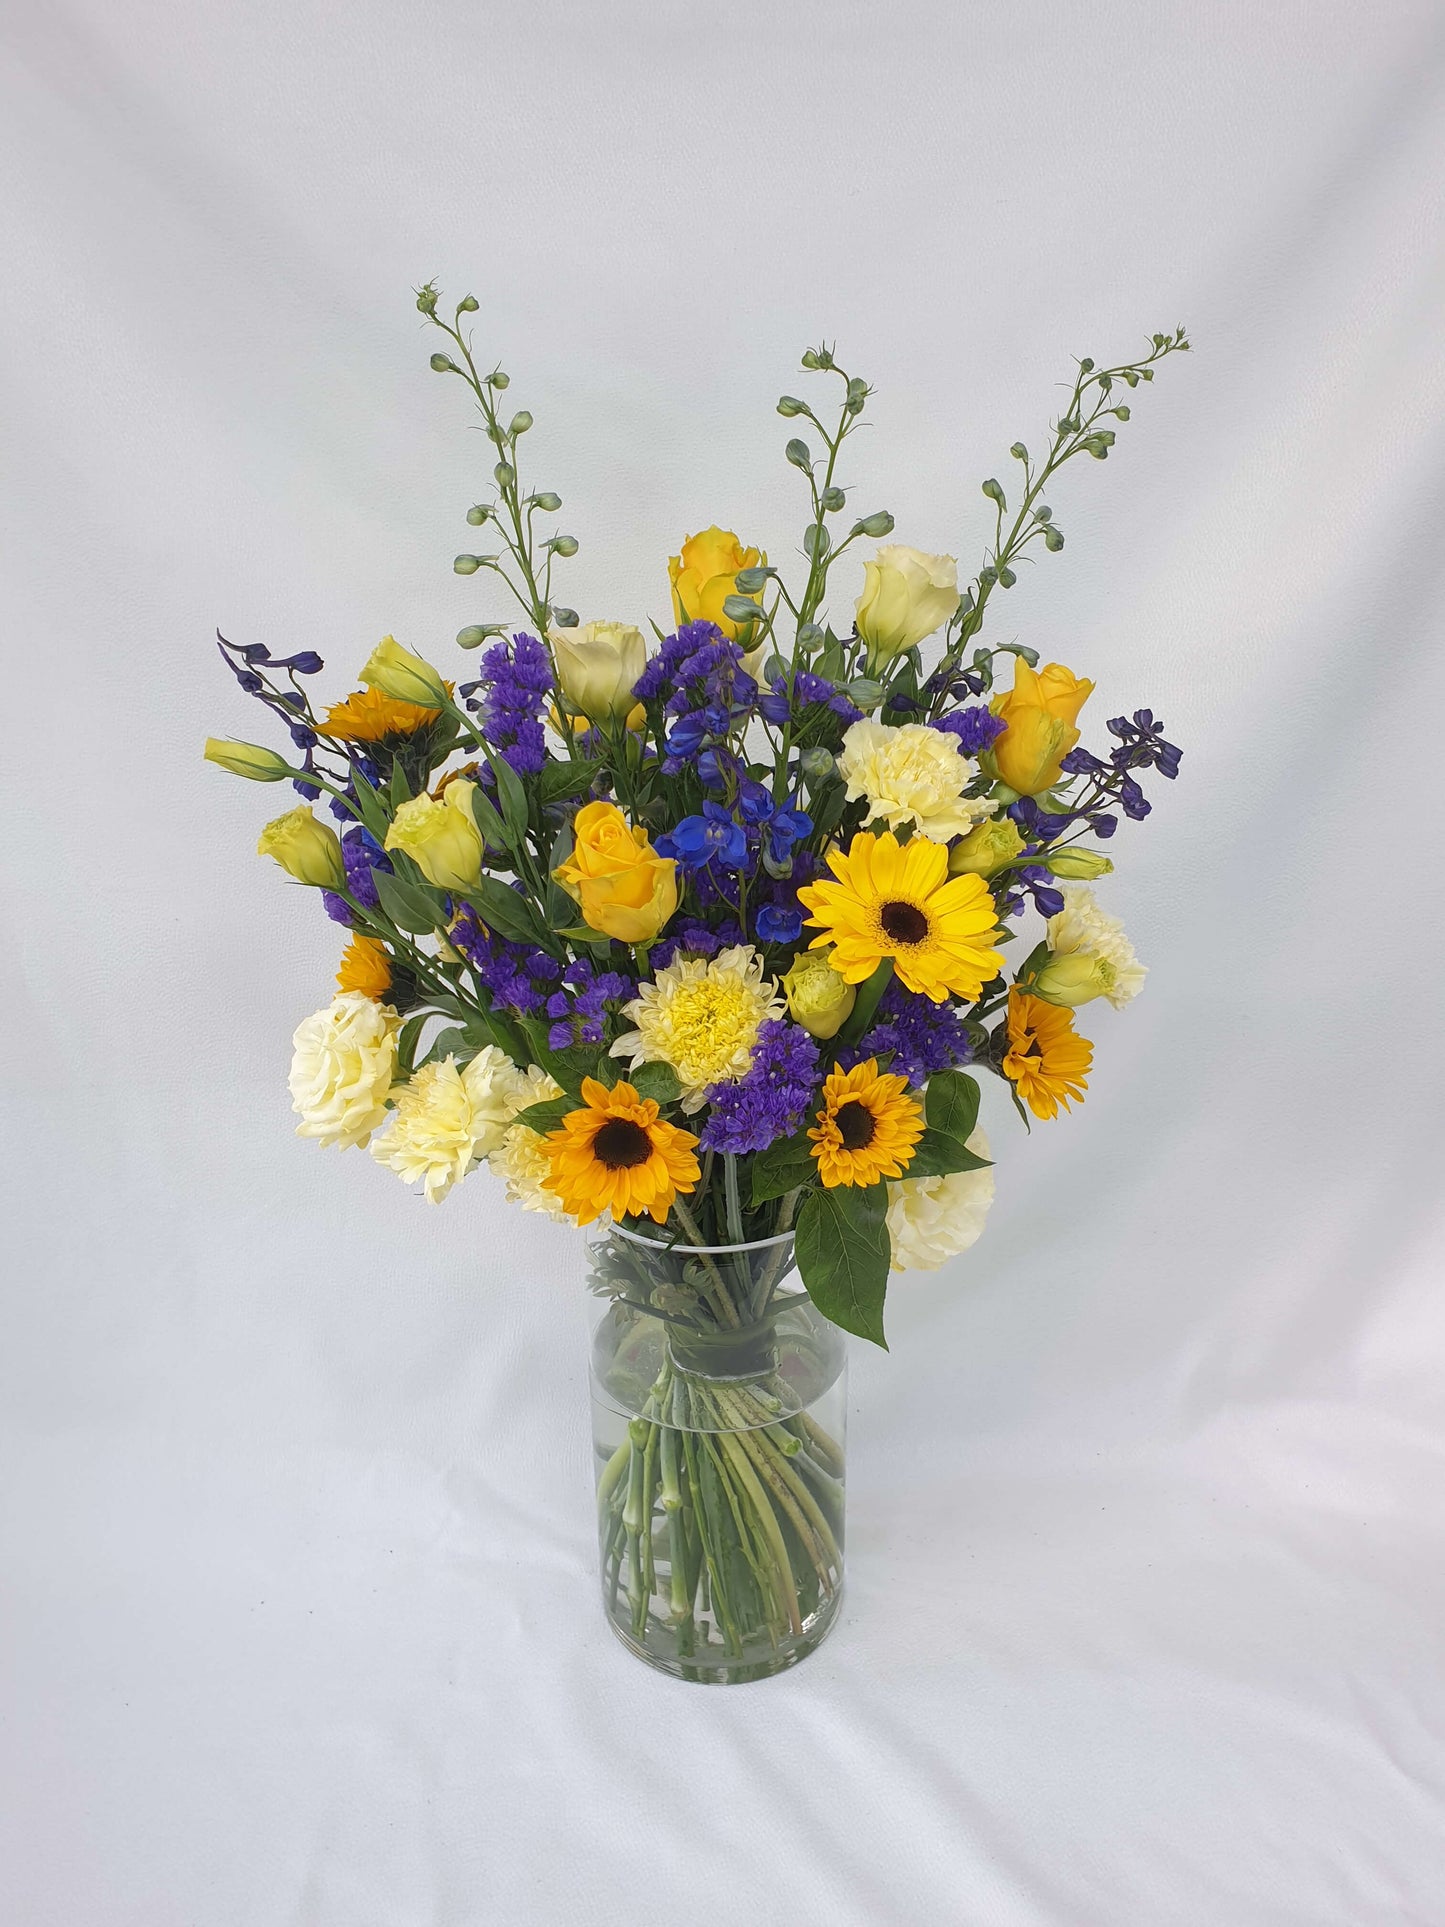 A blue and yellow bouquet